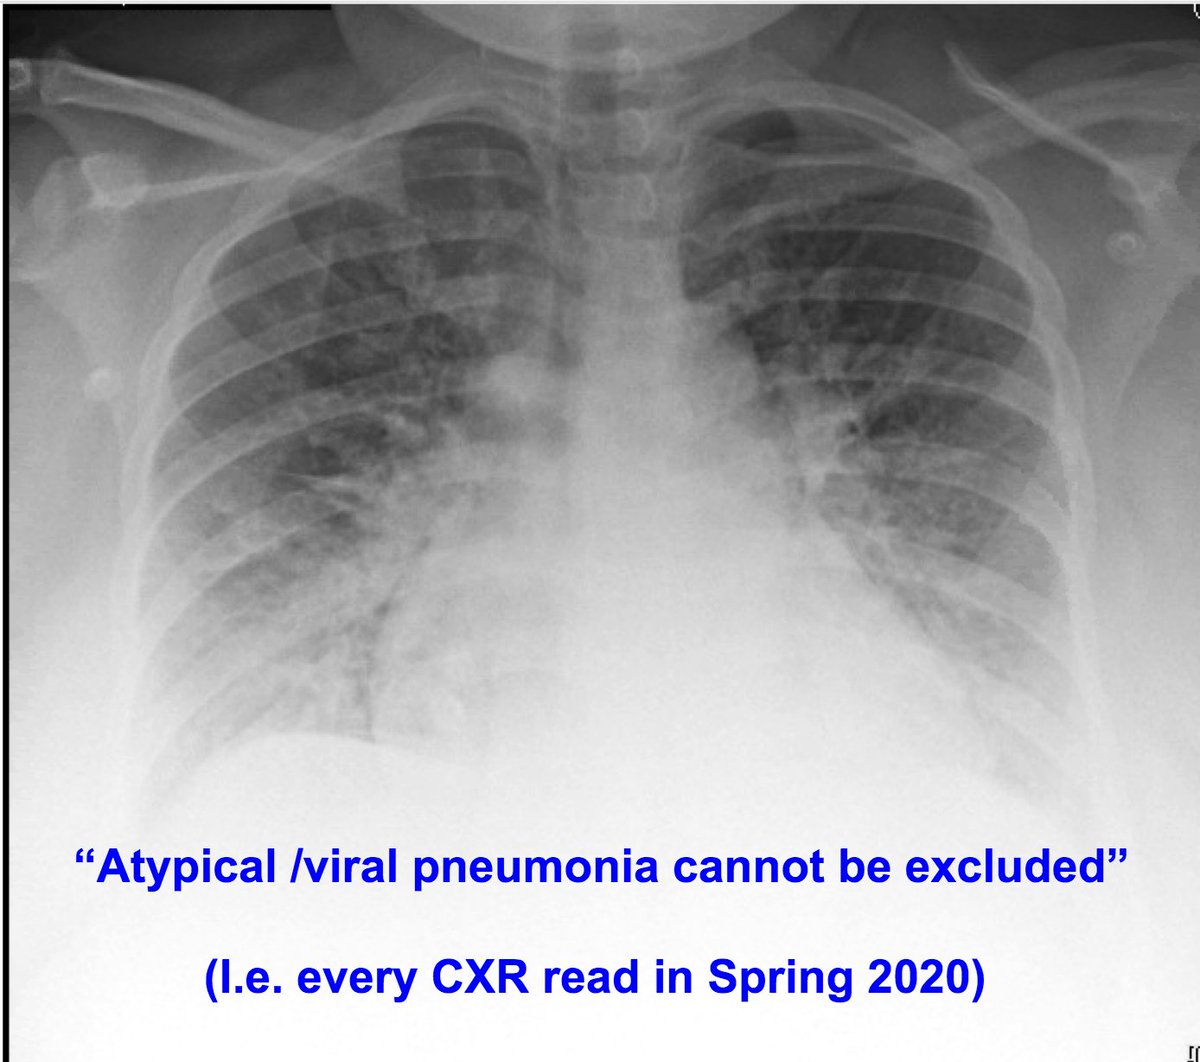 Well, she *also* has dyspnea on exertion, orthopnea, and peripheral edema. This is at the height of our COVID surge in the spring, mind you. PCR is (-), but the CXR … 3/20